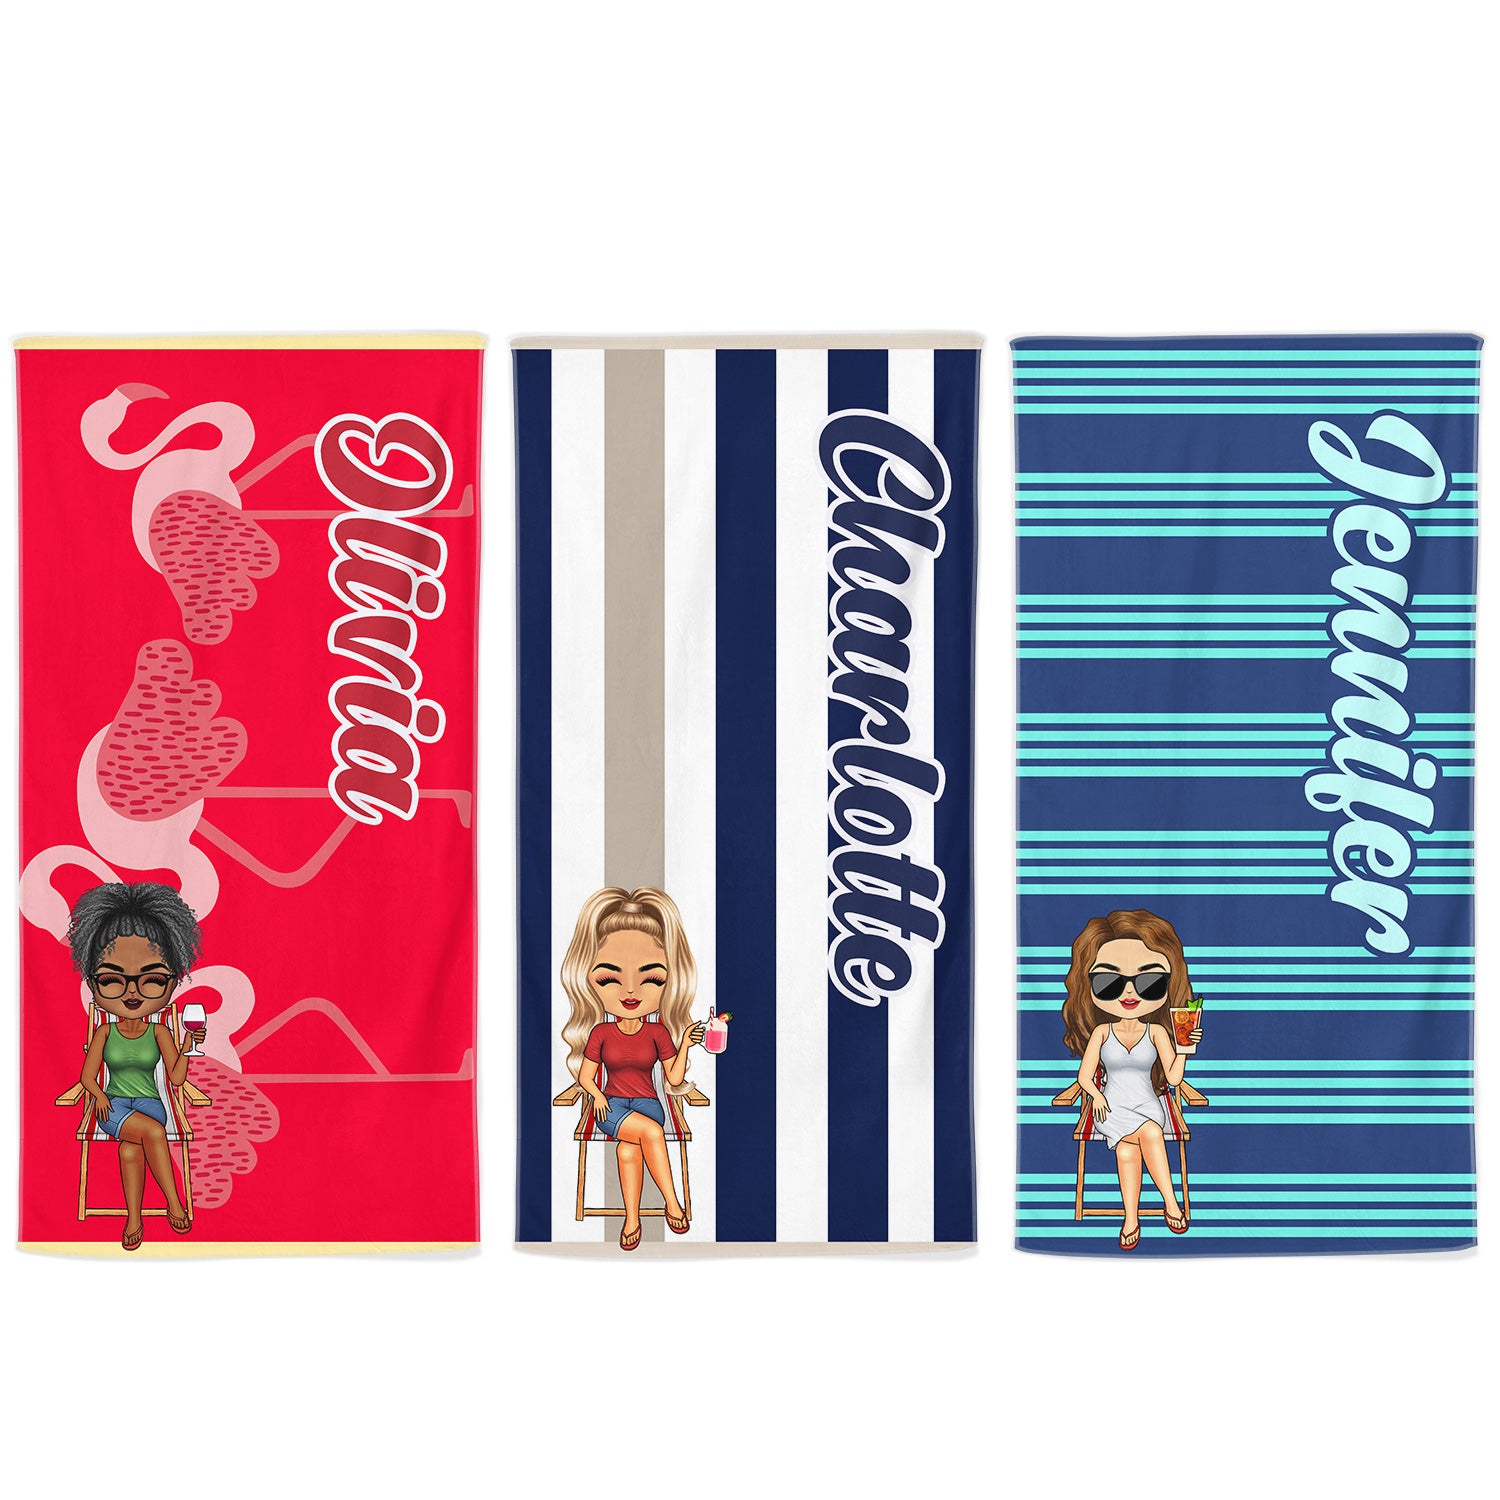 Vacation Stripe Flamingo Lobster Pineapple Shark - Birthday, Anniversary, Travel Gift For Woman, Man - Personalized Beach Towel